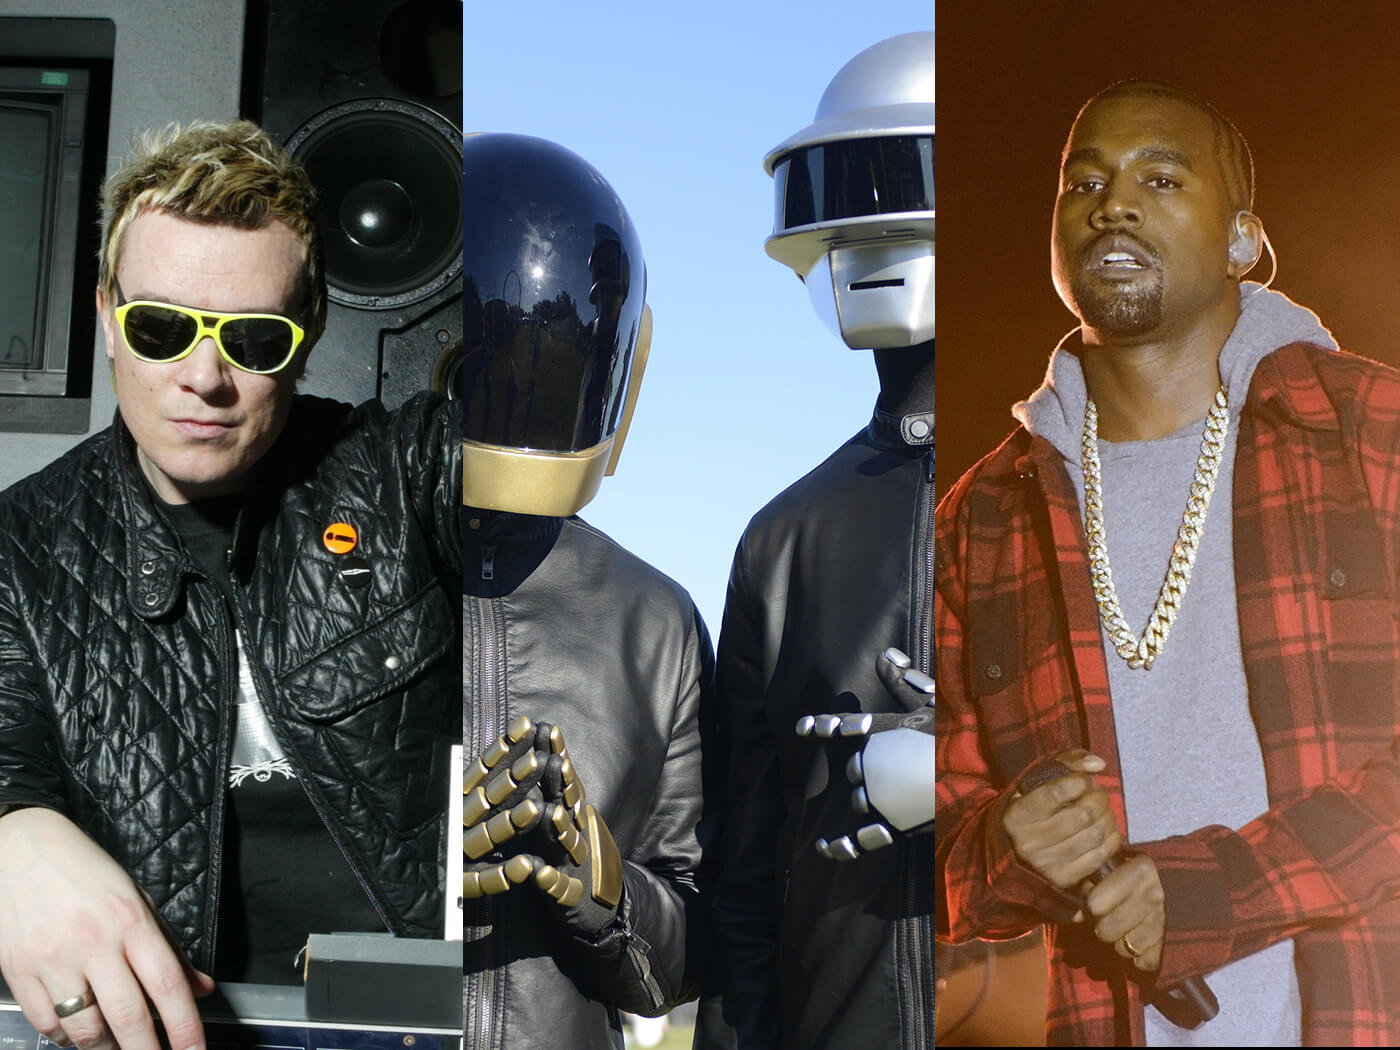 Daft Pink, Liam Howlett and Kanye West